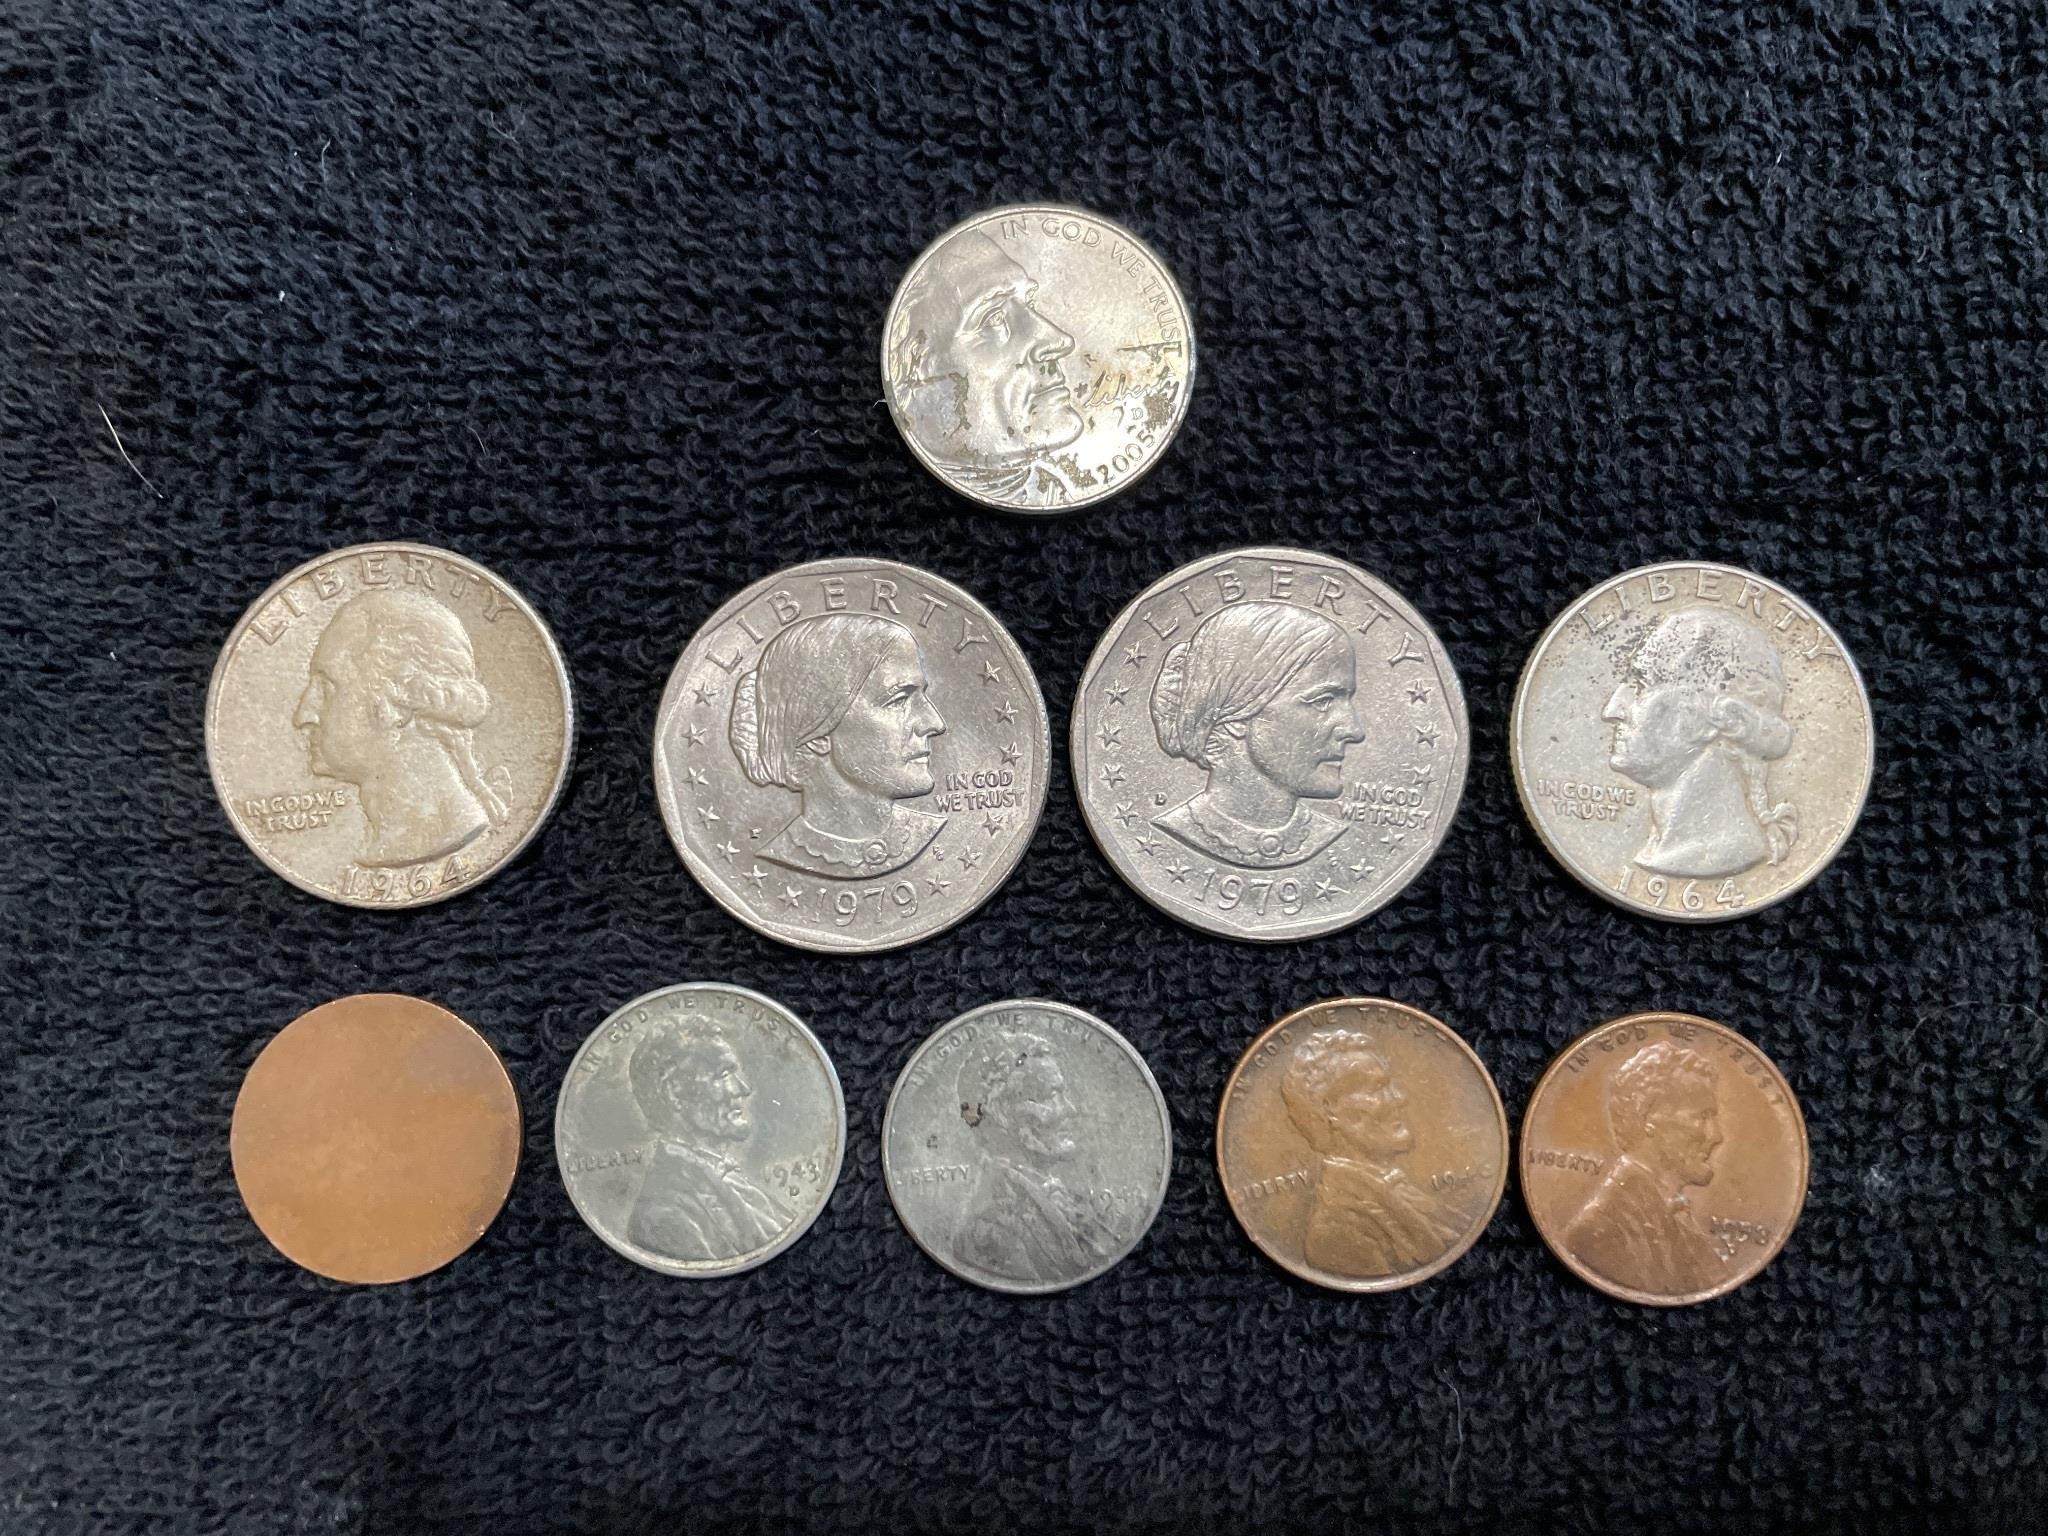 Assorted collectible U.S. coins